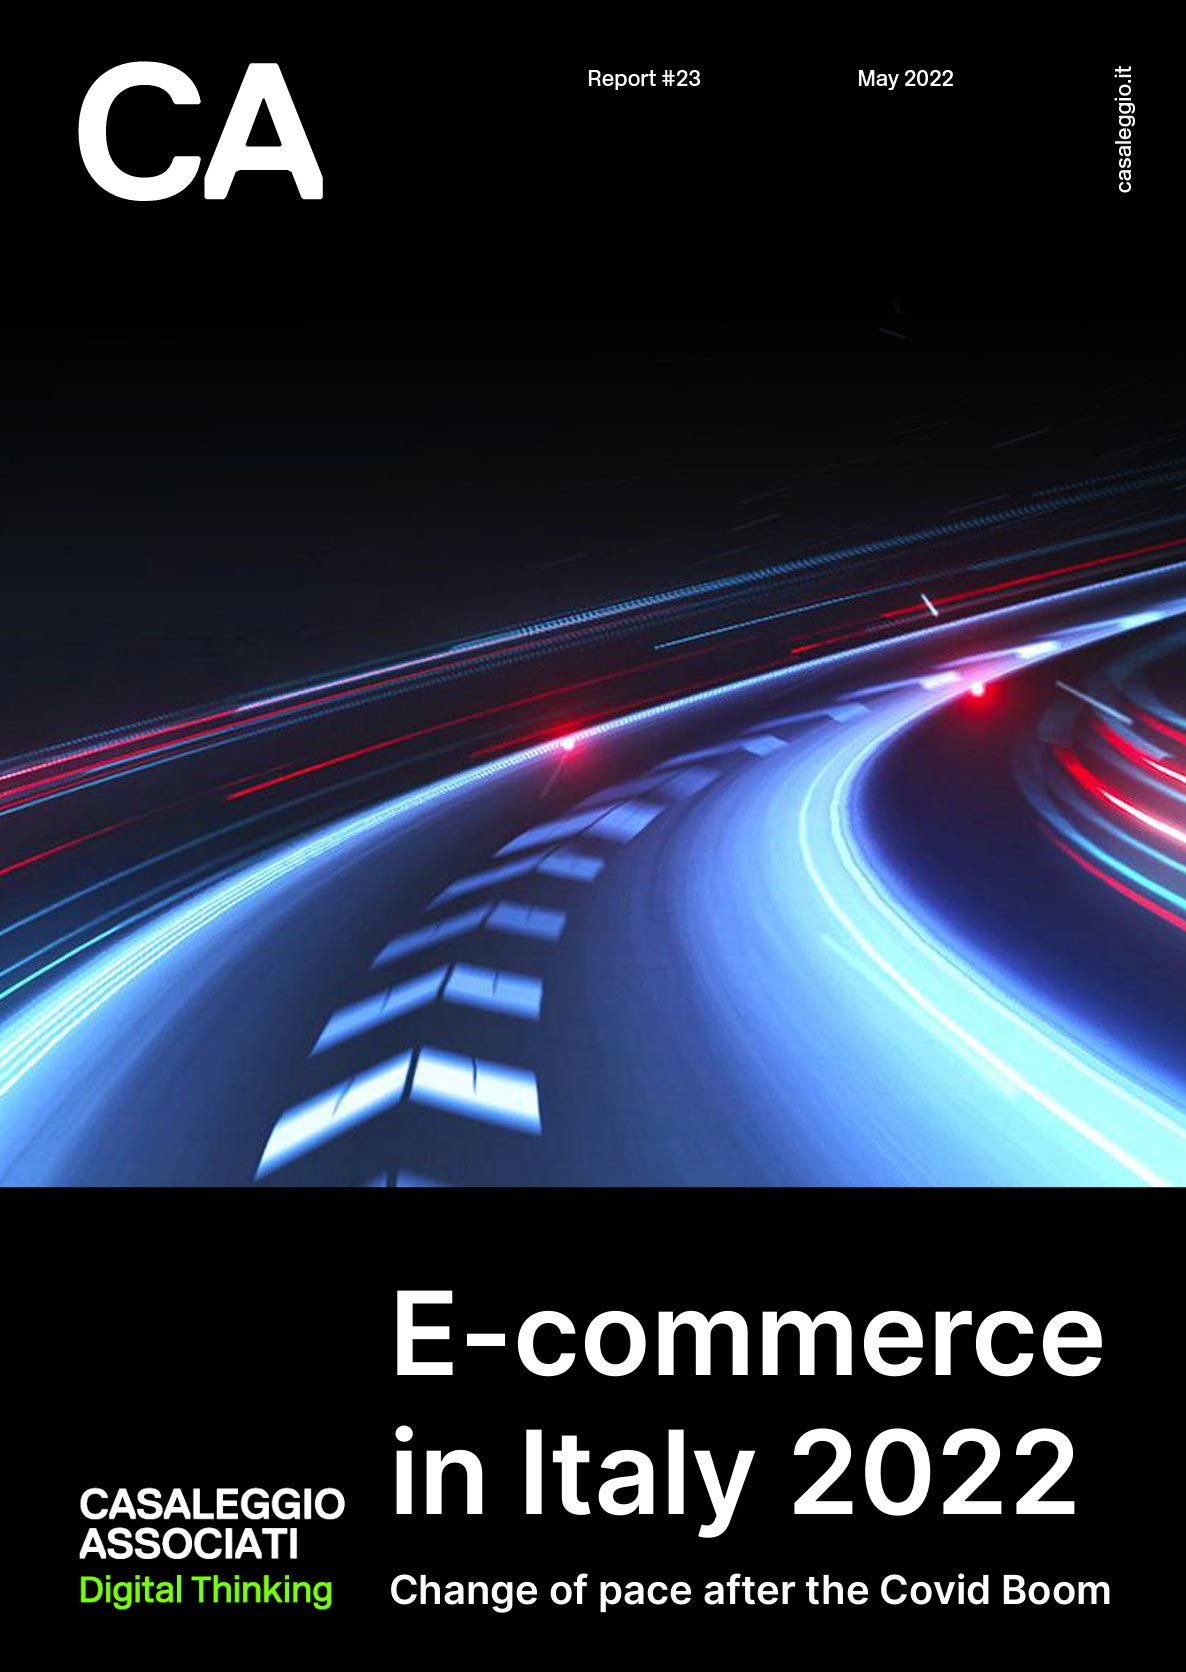 Ecommerce in Italy 2022 - Report